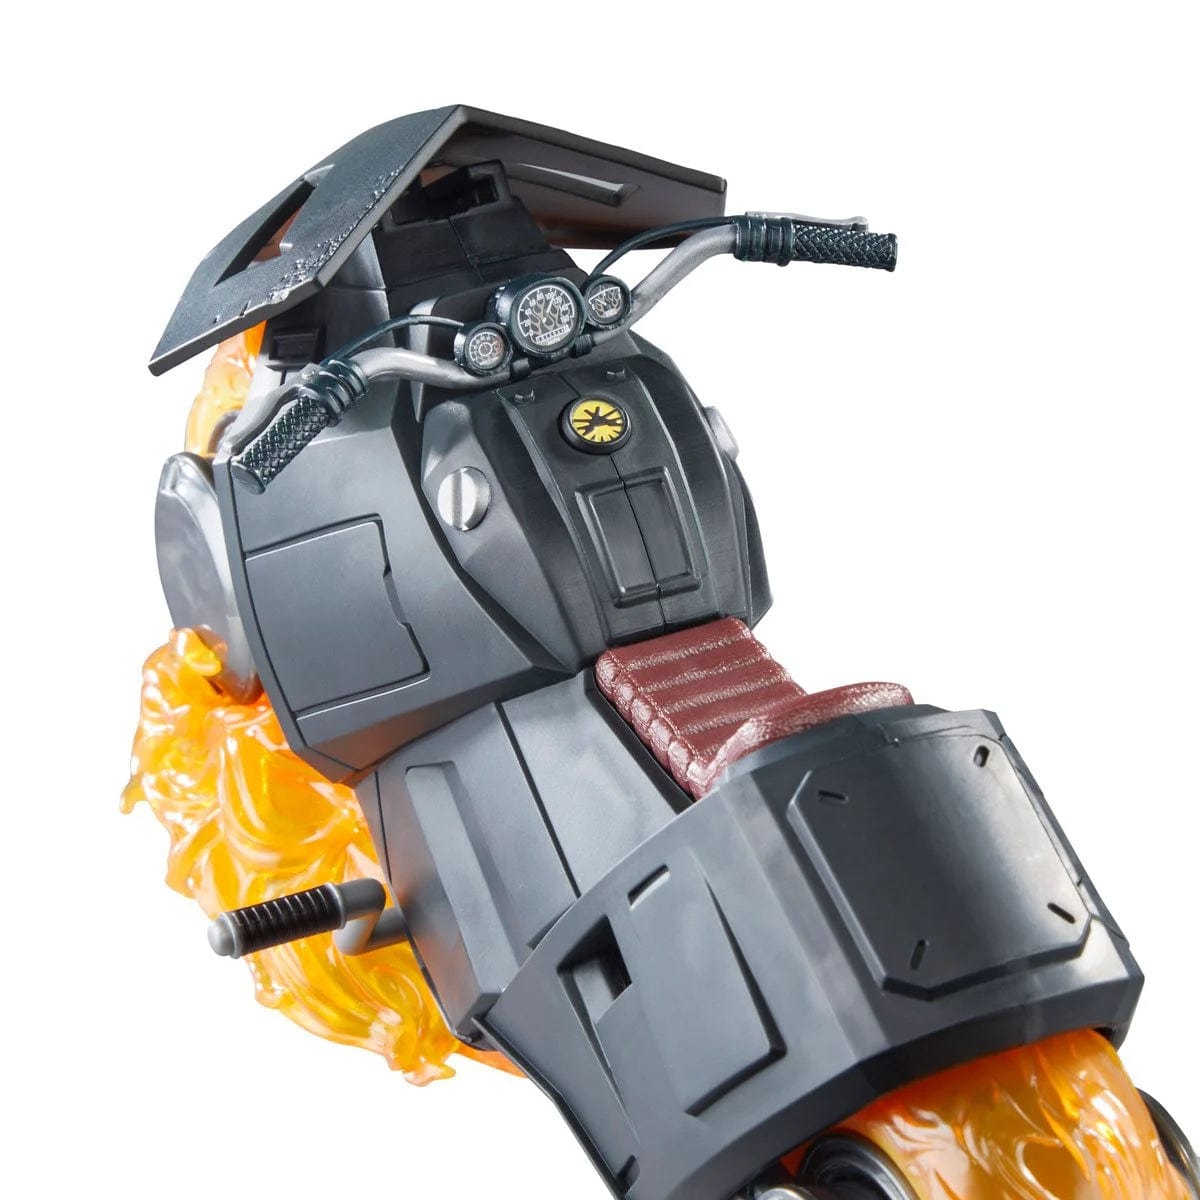 Marvel-Legends-Series-Ghost-Rider-_Danny-Ketch_-with-Motorcycle-Action-Figure-Bike-Detailing